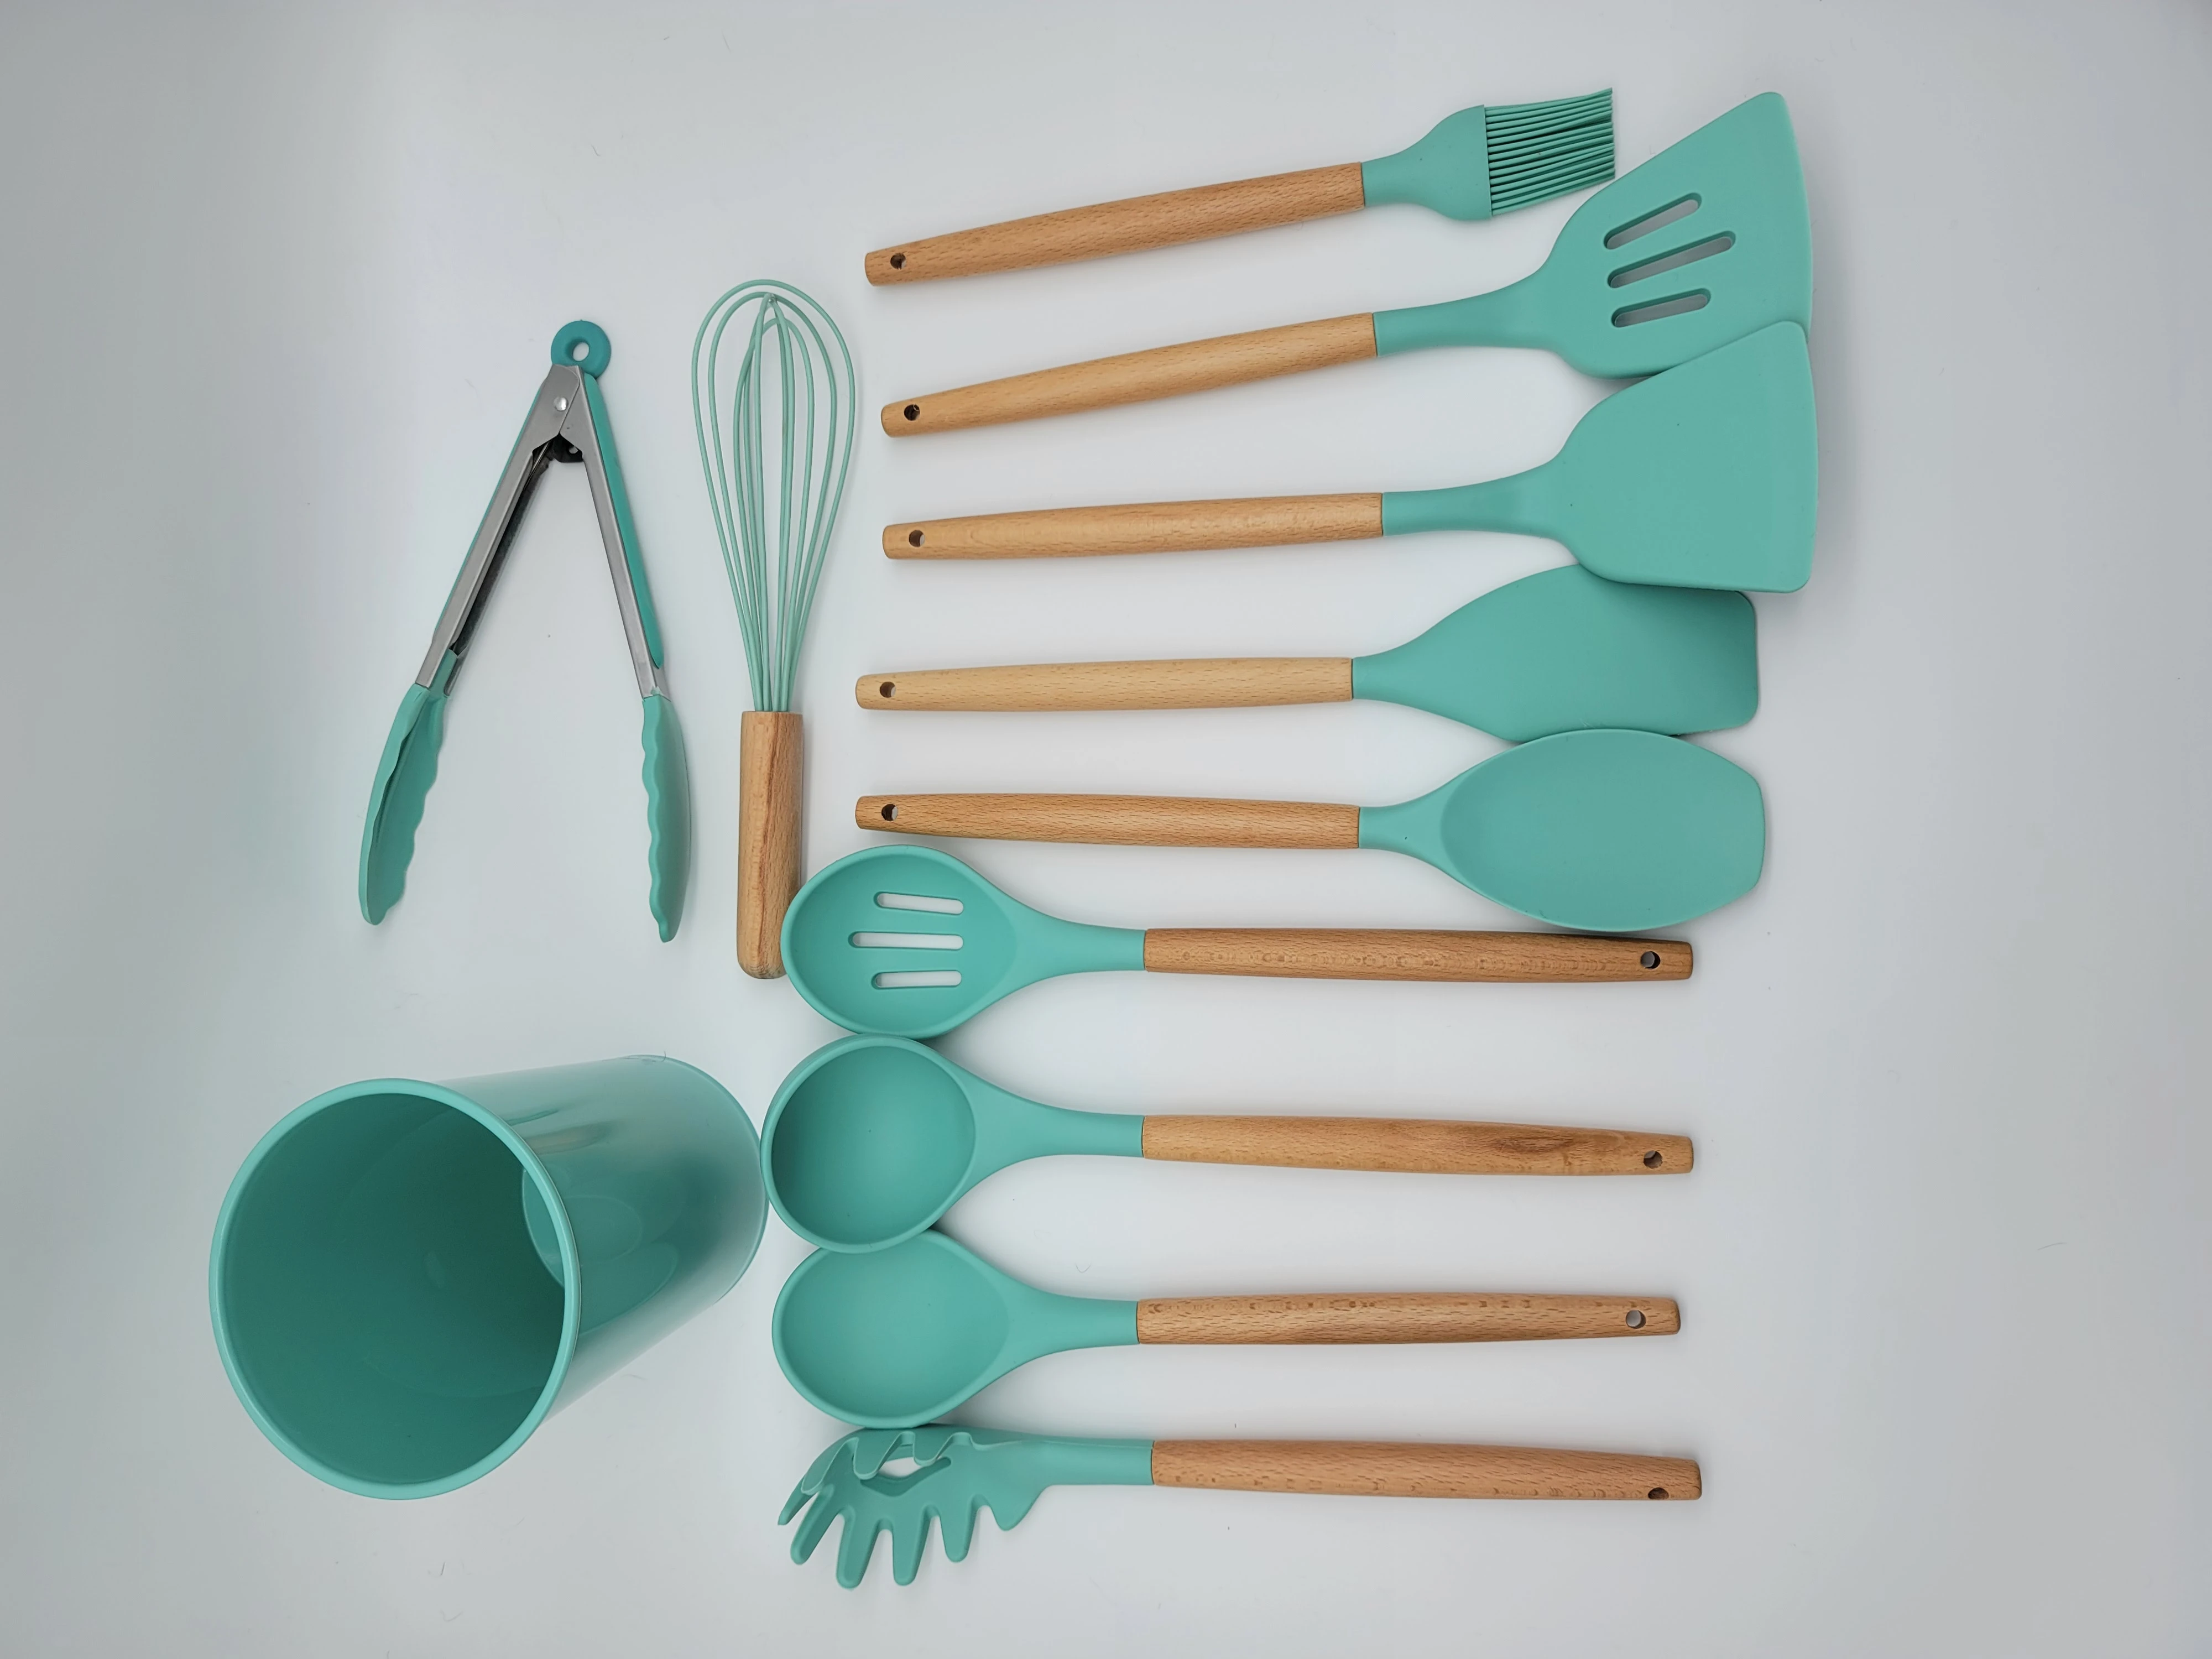 Silicone Kitchen 12pcs set Bamboo Handles Silicone Kitchen Utensil Set Food Grade High Quality Kitchen Accessories